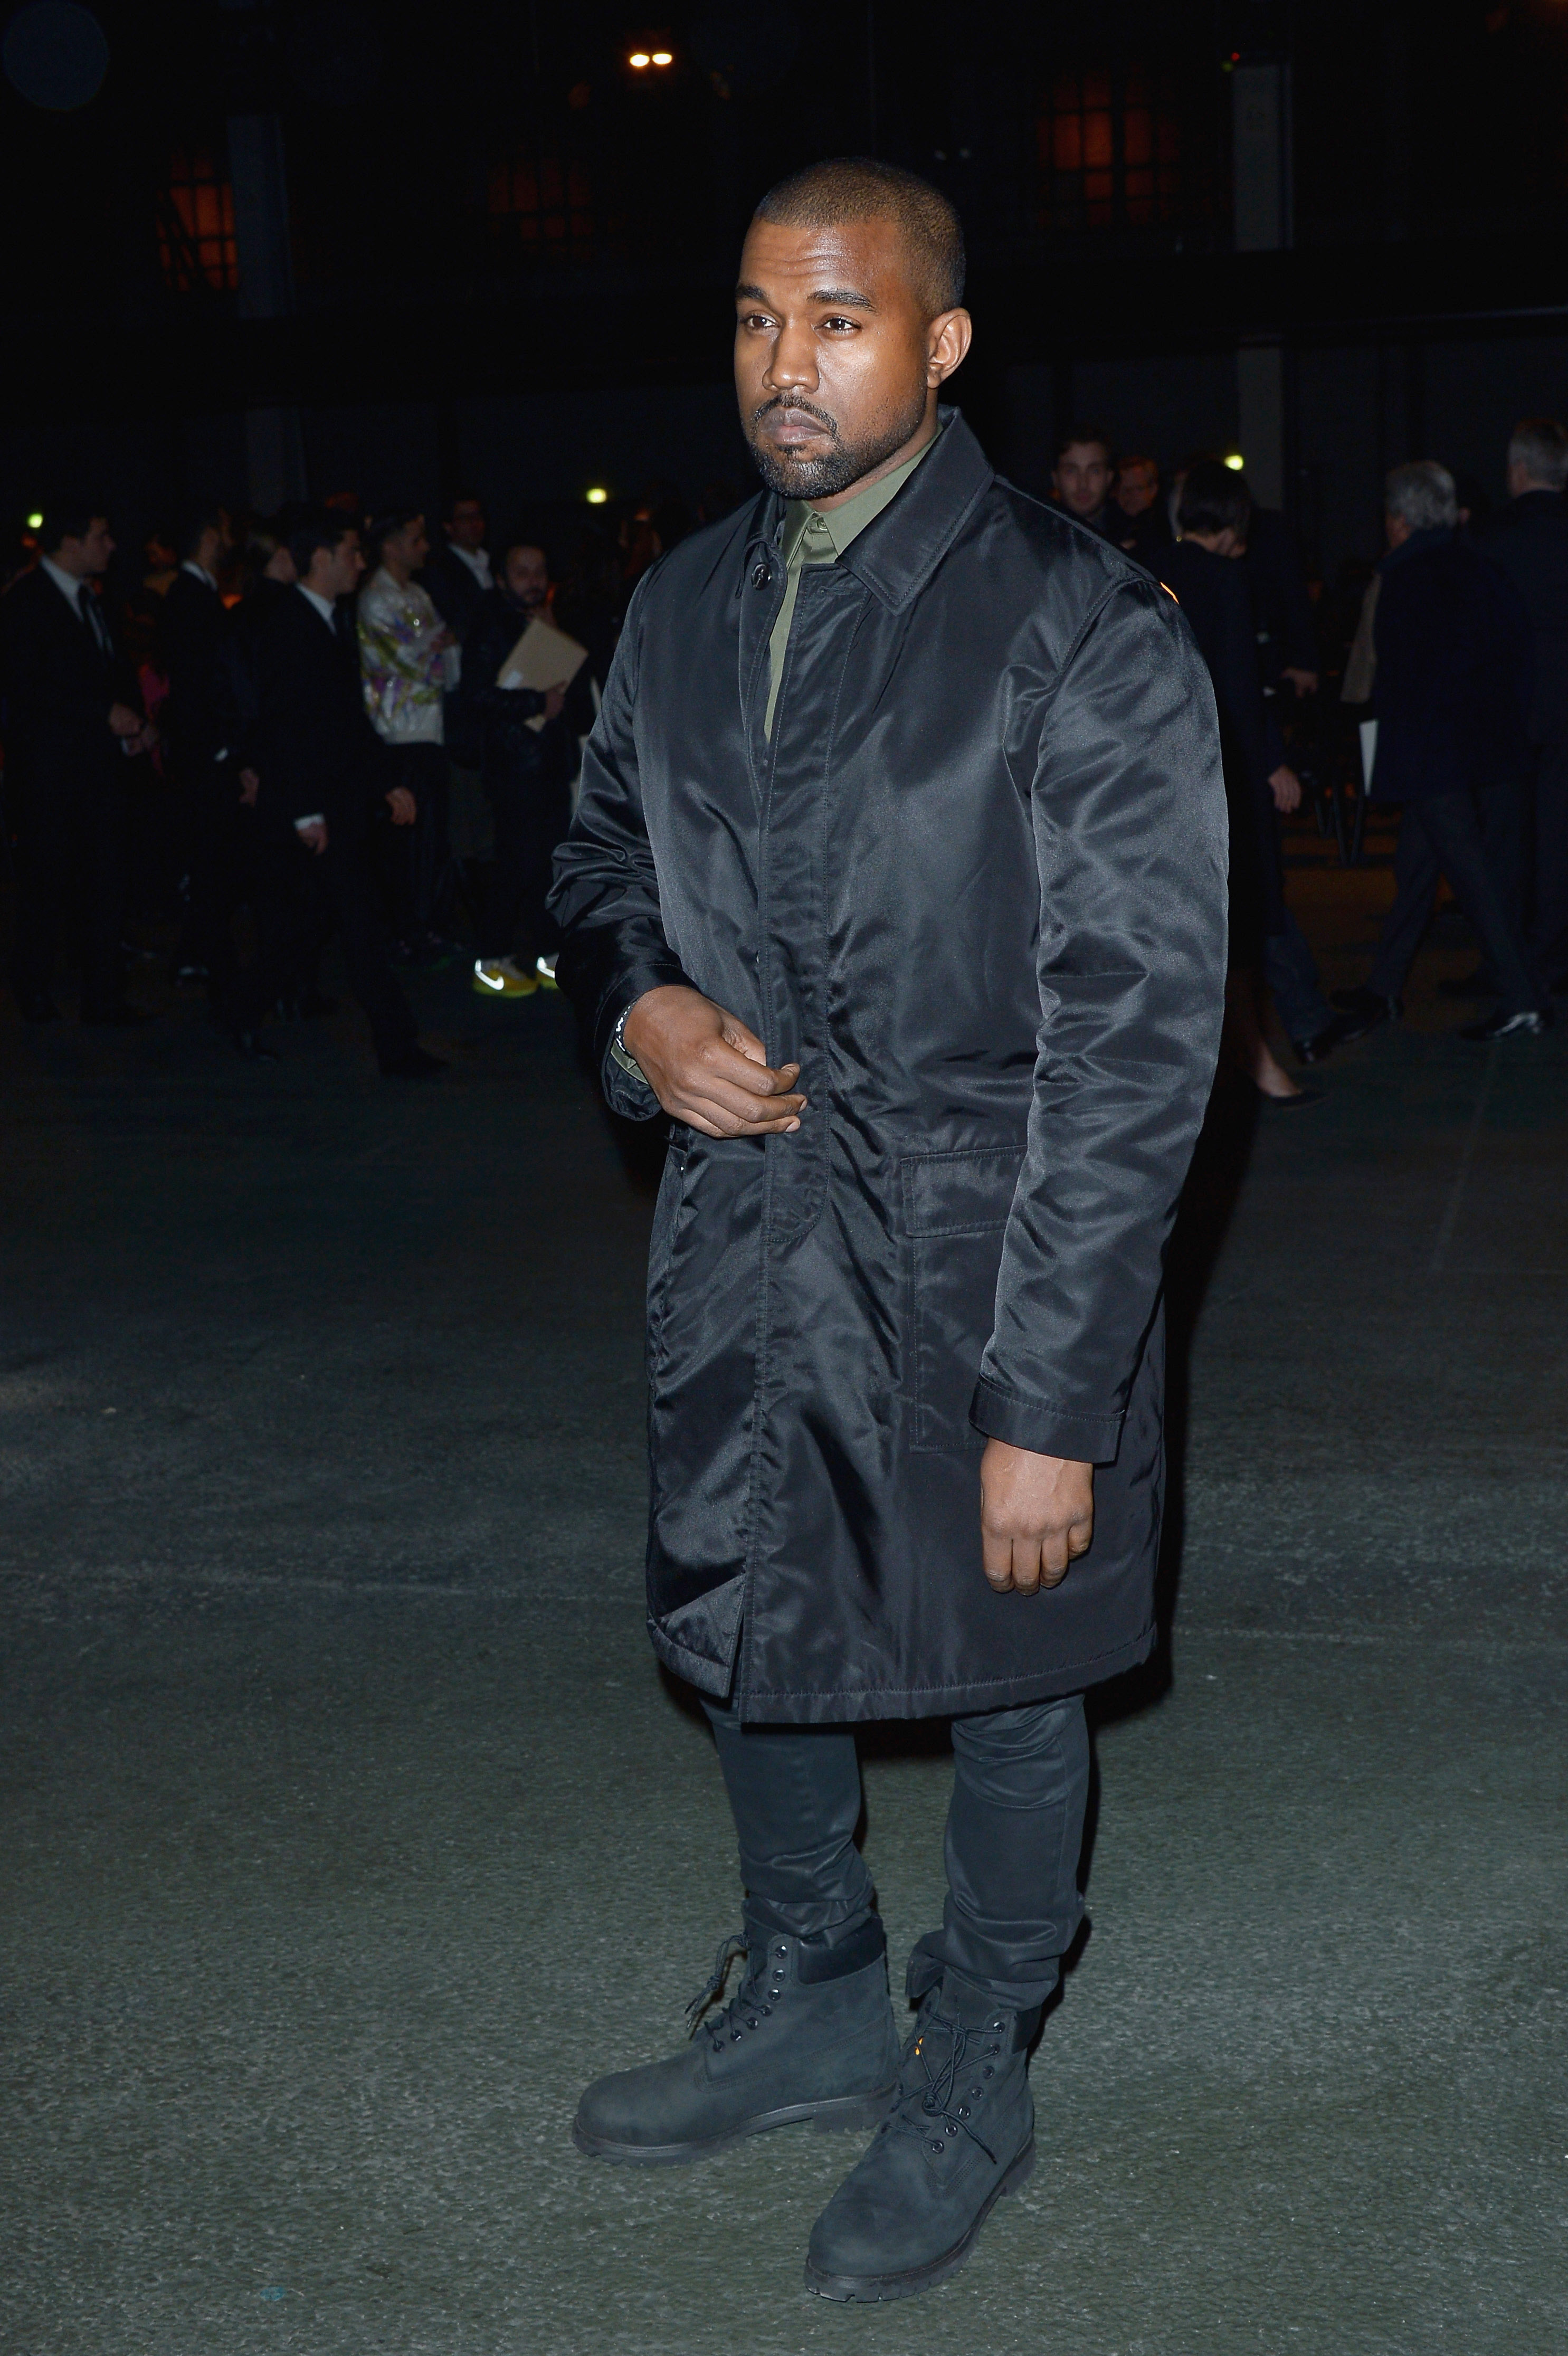 Kanye West attends the Givenchy during Paris Fashion Week Womenswear Fall/Winter 2014-2015 on March 2, 2014 in Paris. (Dominique Charriau—Getty Images)